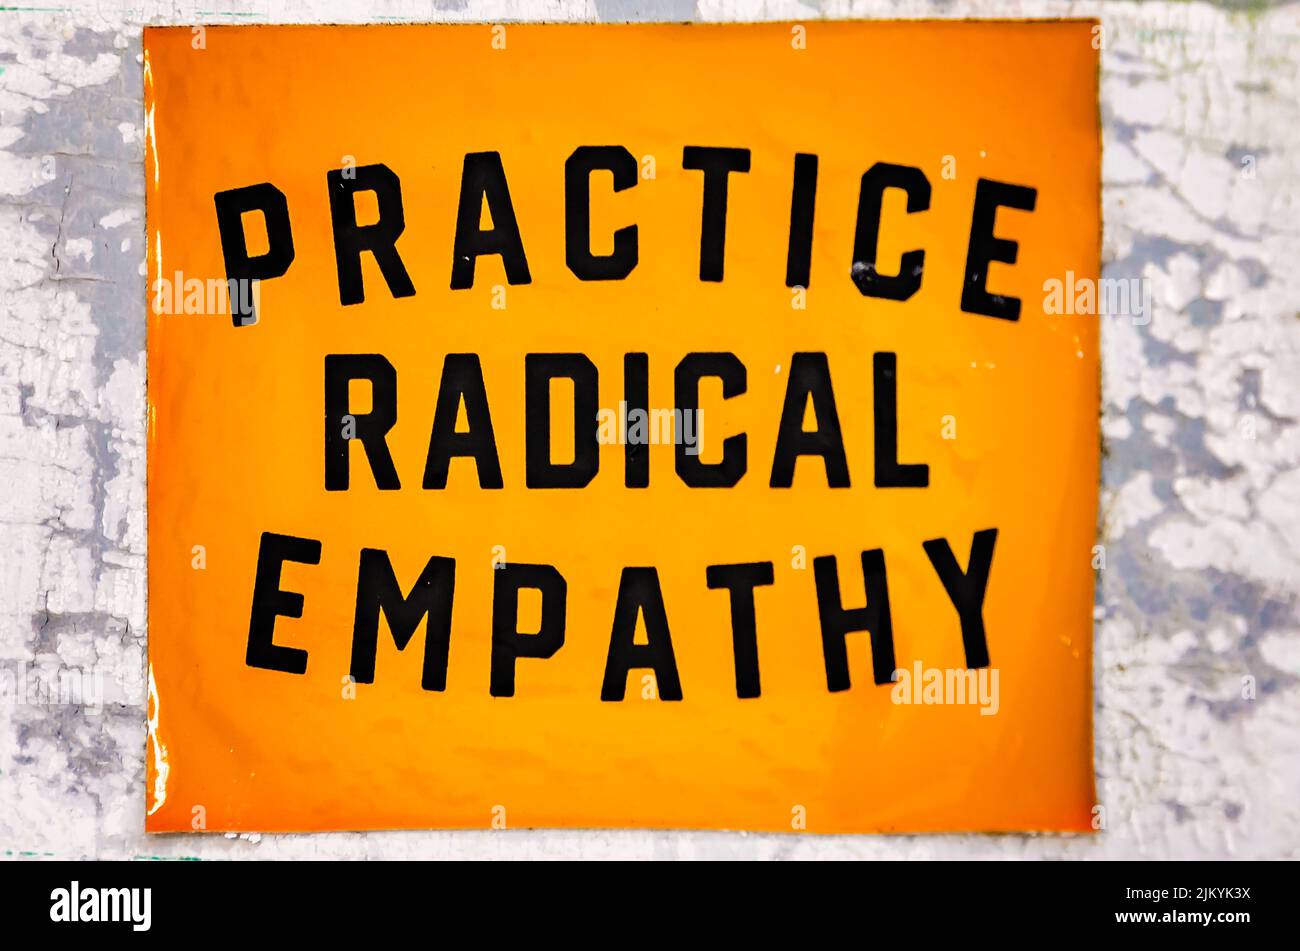 A sign encourages people to “Practice Radical Empathy,” July 31, 2022, in Ocean Springs, Mississippi. Stock Photo